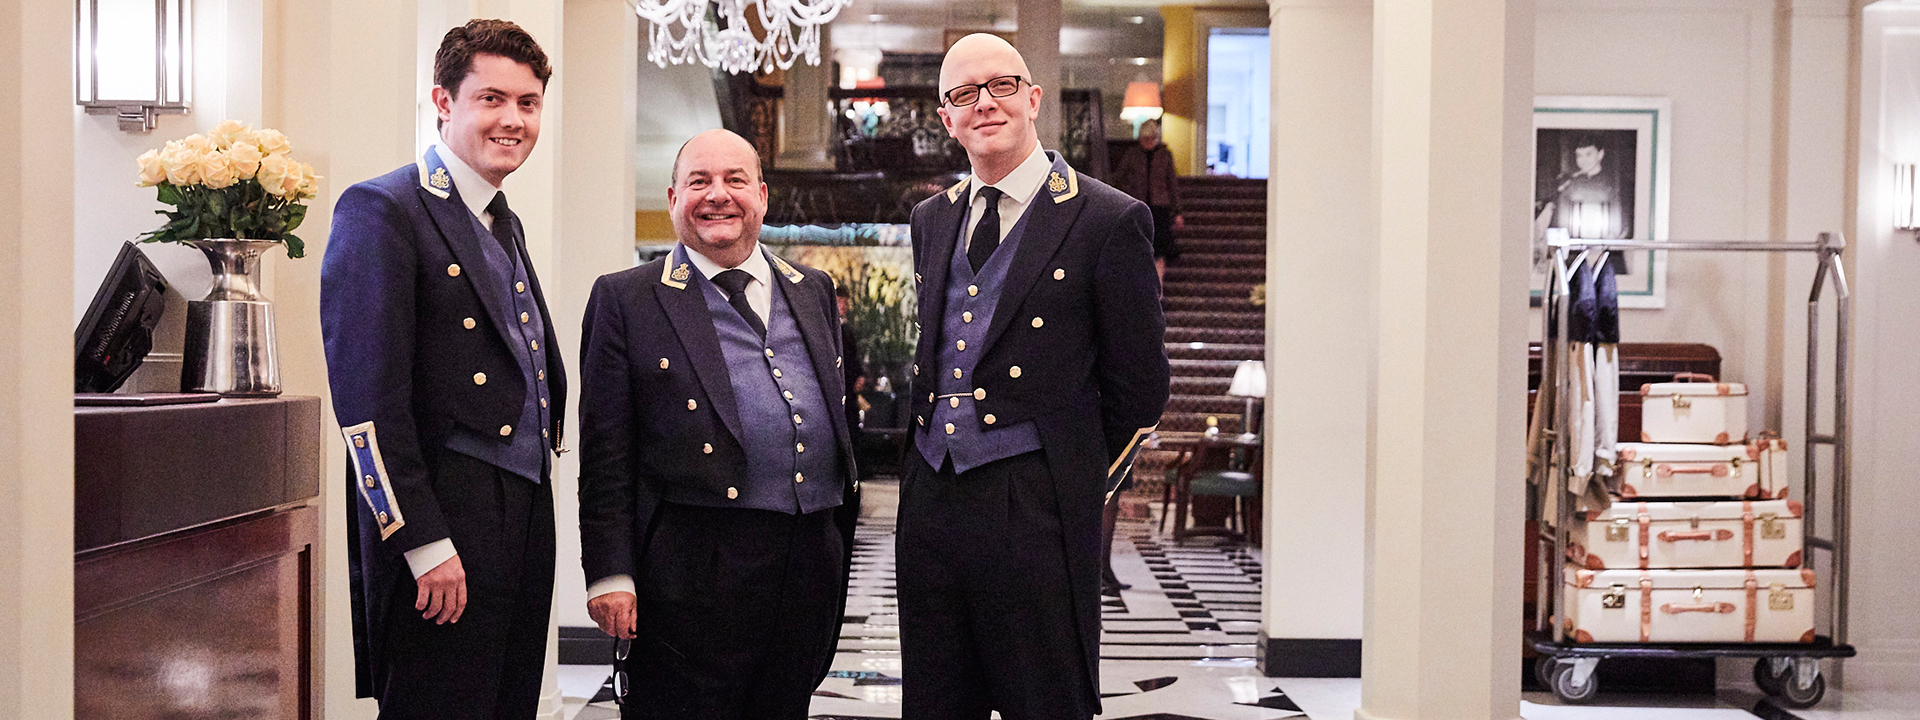 Smiling concierge team waiting for their guests at Claridge's Hotel.